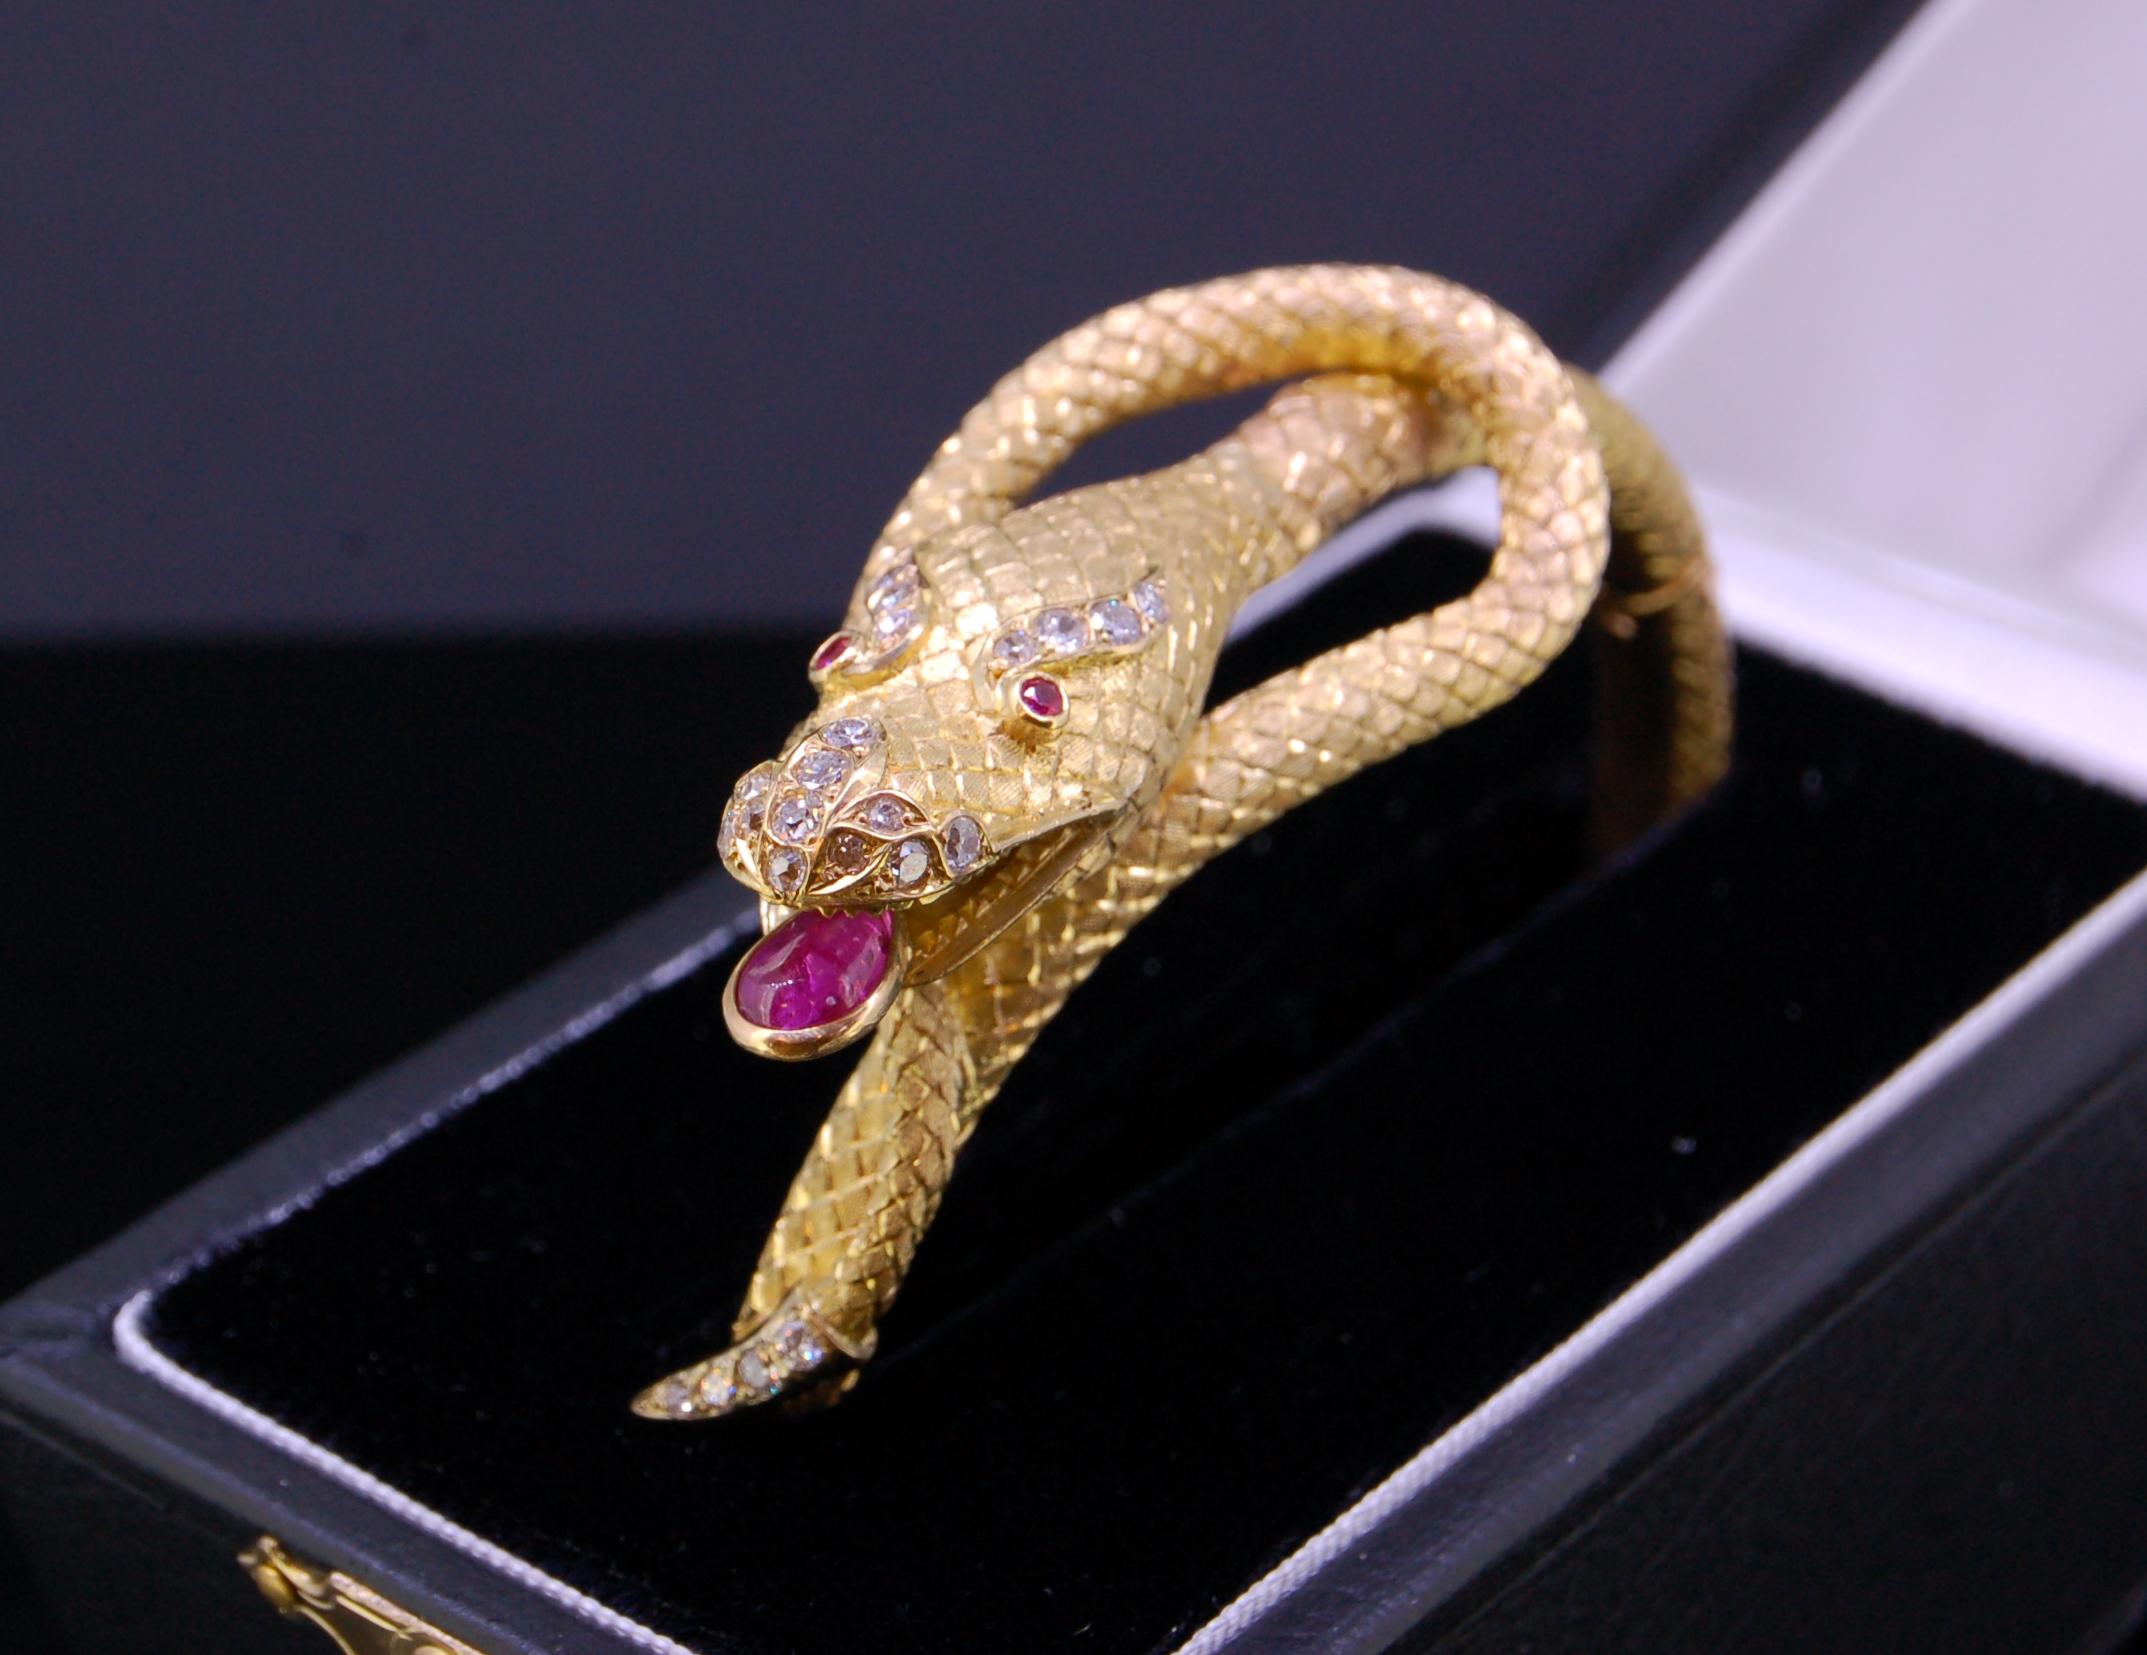 GOLD CHINESE DRAGON BANGLE, in yellow precious metal. The tongue set with a ruby of 1.29 ct. and diamond accents on the nose and eyes. The bangle overall with dragon skin pattern. Inner diam. 6.3 cm. 69.5 grams. With a fitted box.